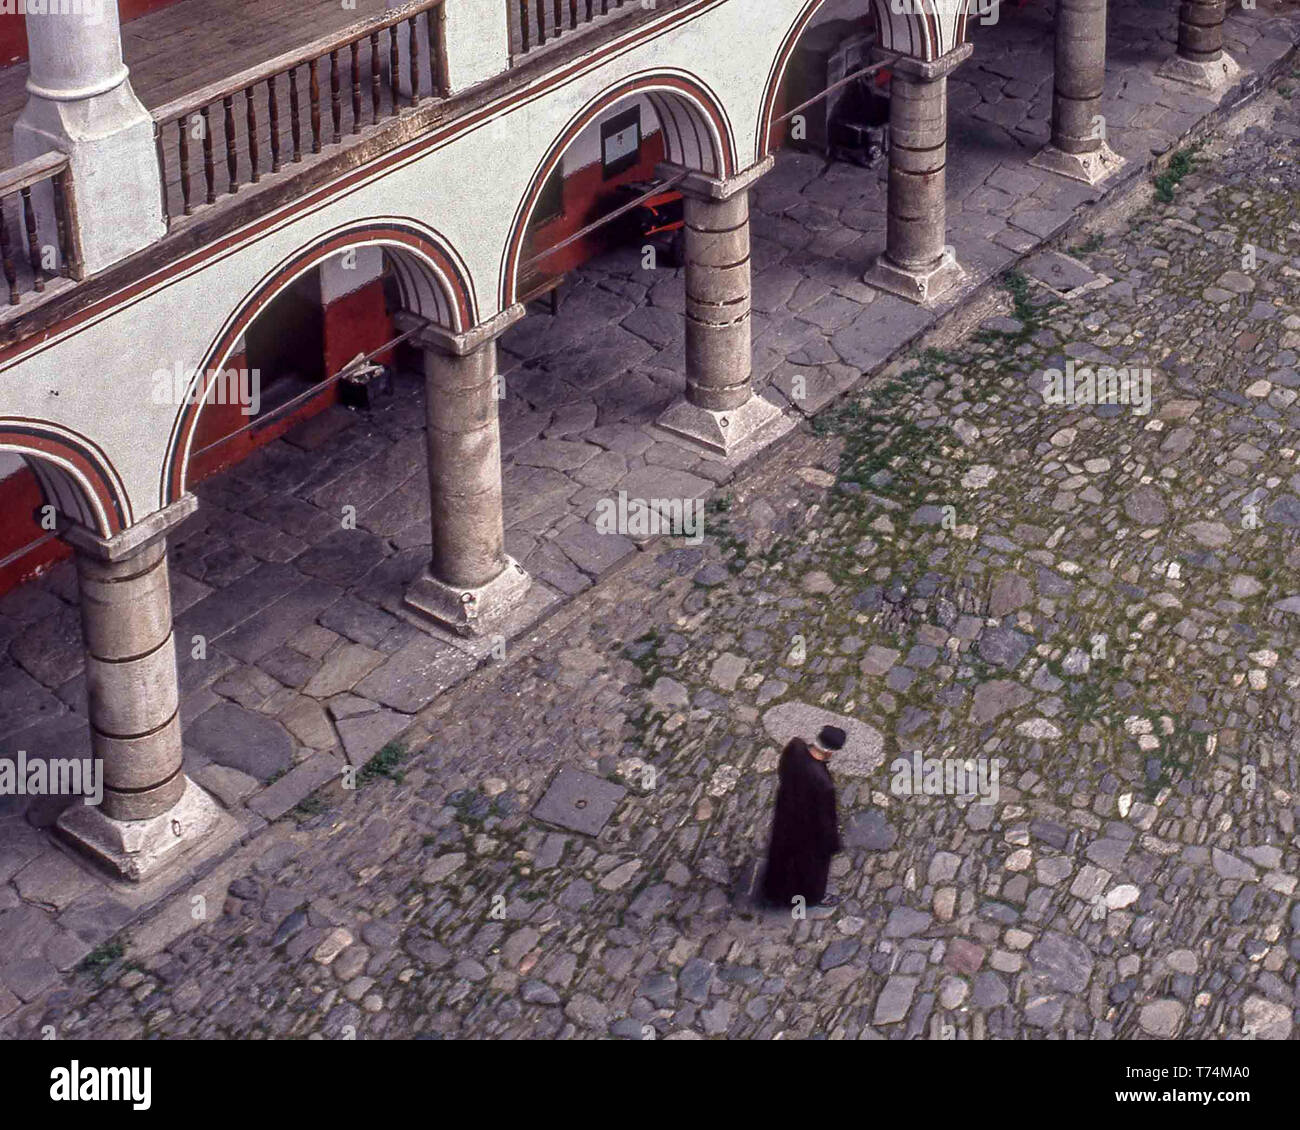 Kyustendil, Bulgaria. 1st Aug, 1991. A monk, with head bowed, walks in the courtyard of the 10th century Rila Monastery (Monastery of Saint Ivan of Rila), the largest and most famous Bulgarian Eastern Orthodox monastery, in the southwestern Rila Mountains, is inside of Rila Monastery Nature Park. One of Bulgaria's most important cultural, historical and architectural monuments it is home to about 60 monks and is a key tourist attraction for Bulgaria and Southern Europe. Credit: Arnold Drapkin/ZUMA Wire/Alamy Live News Stock Photo